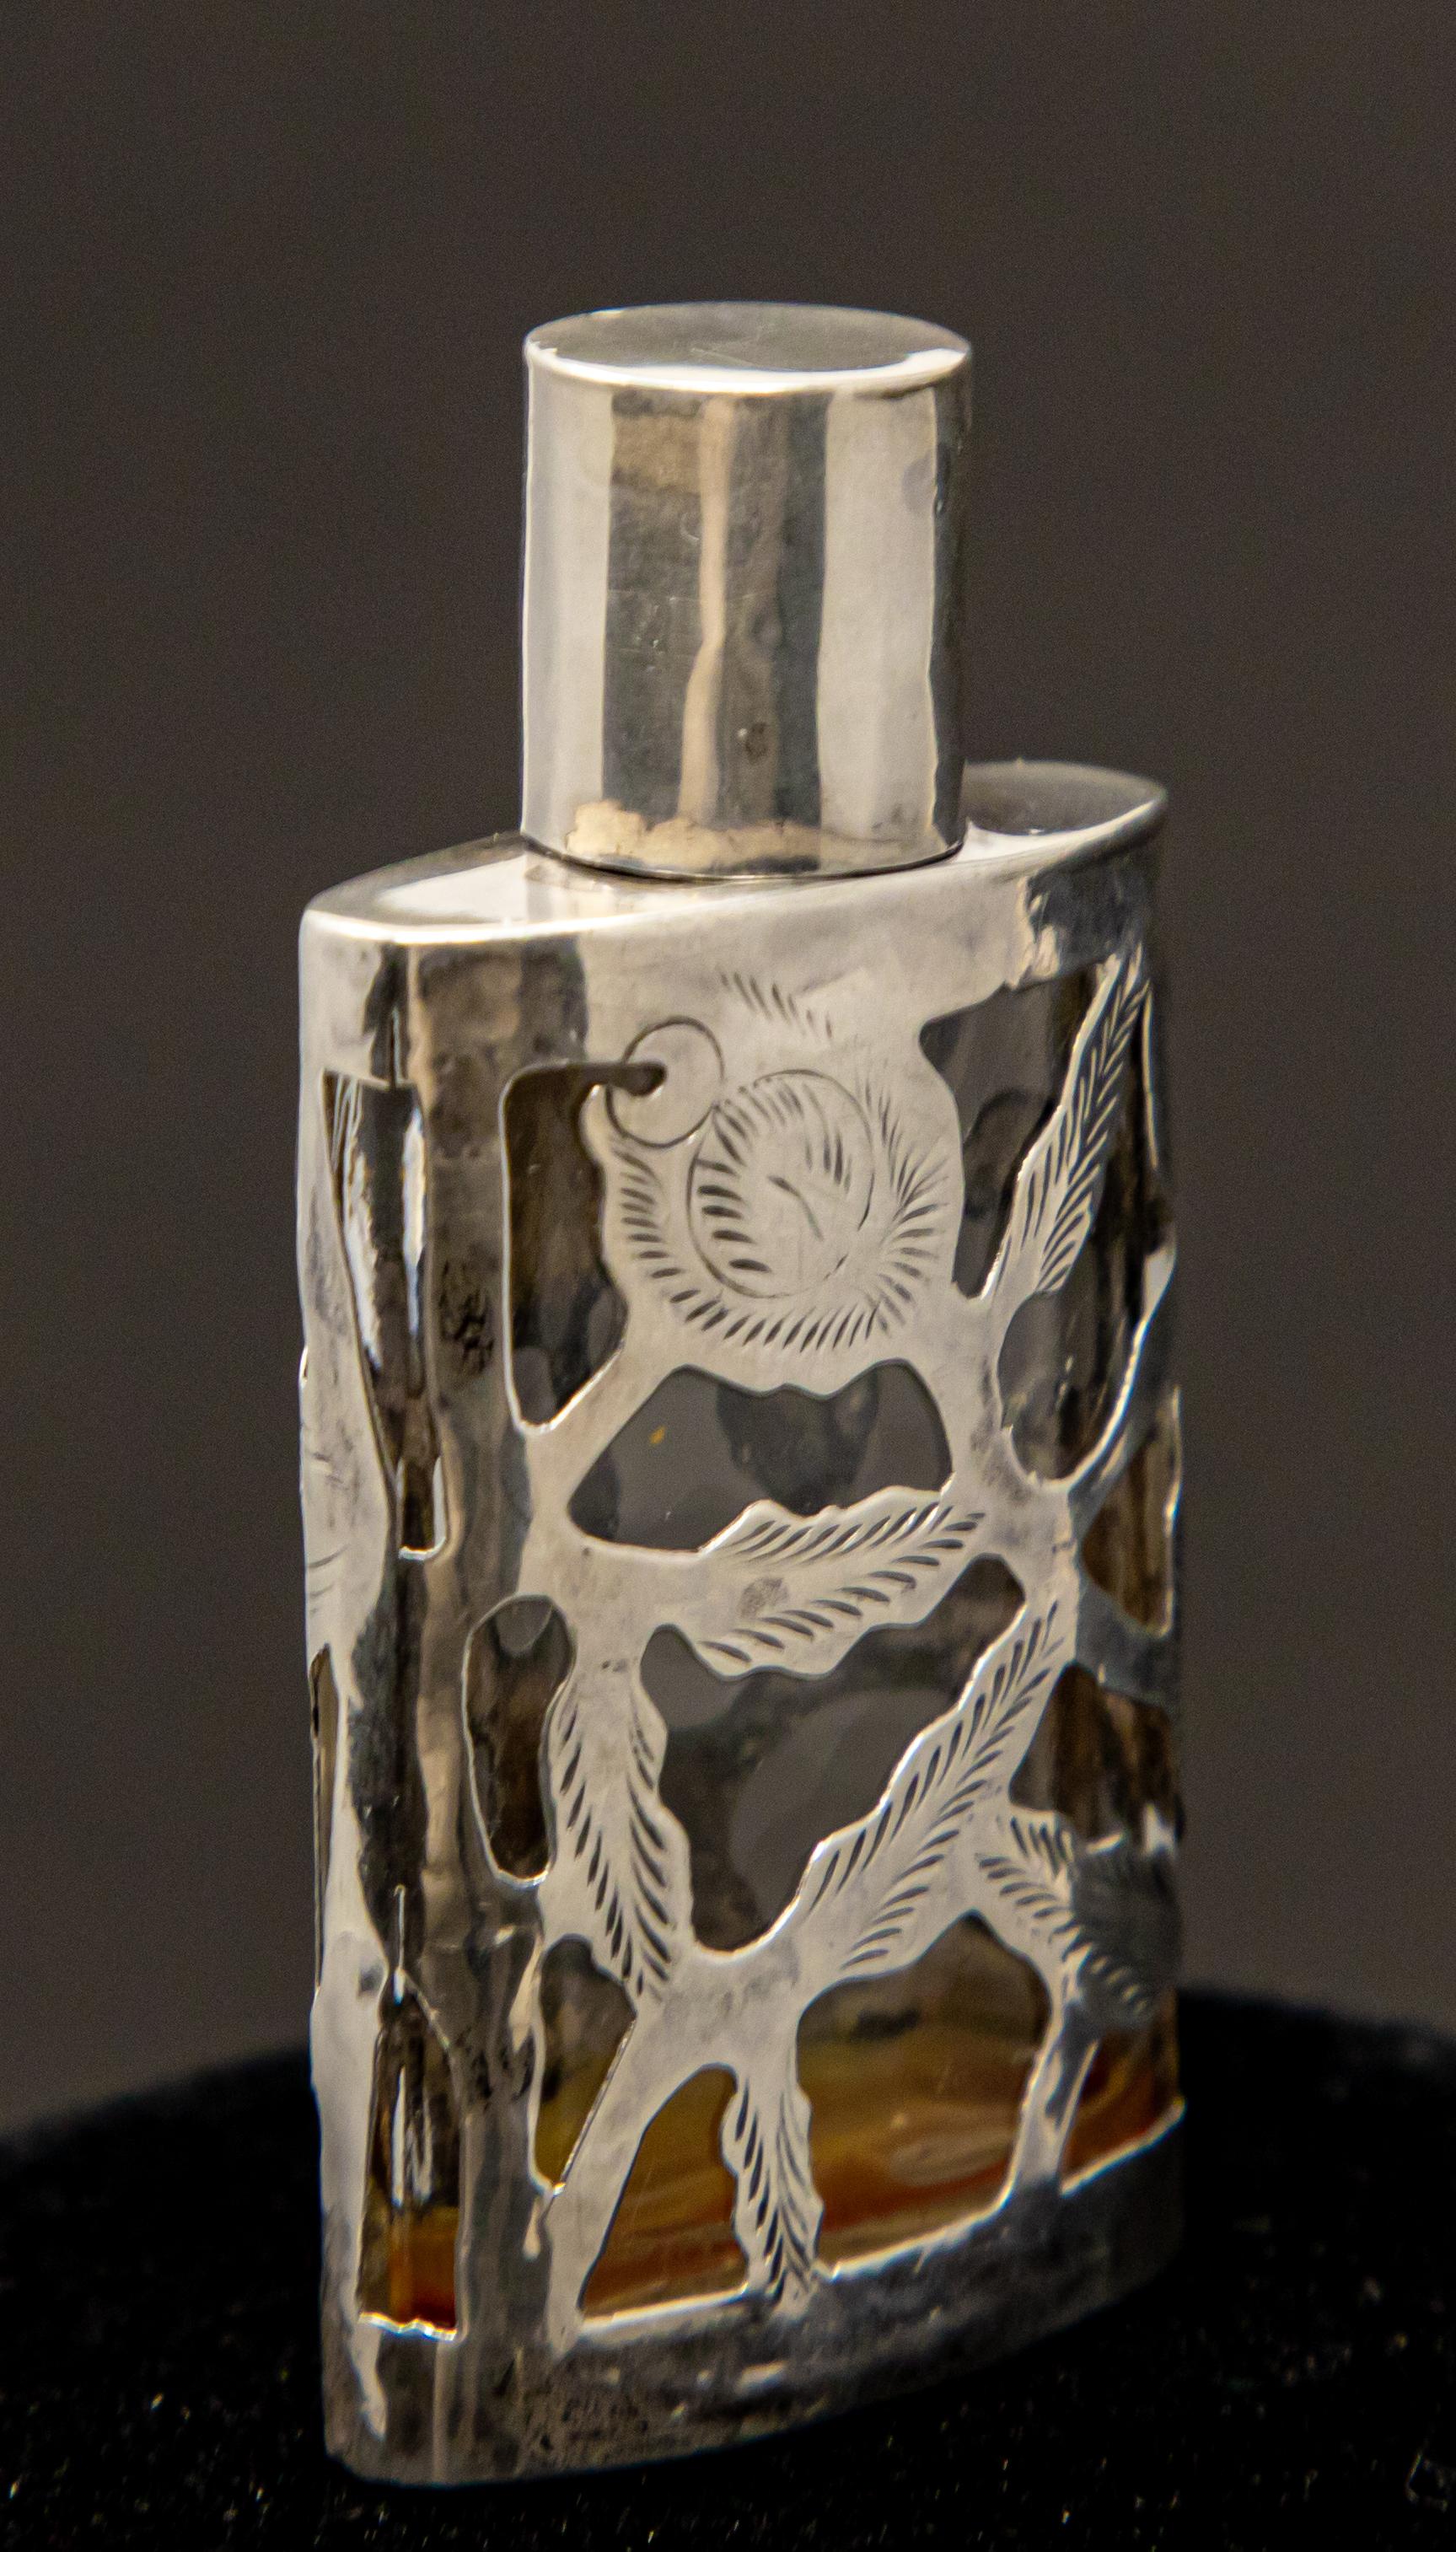 Offering this gorgeous Art Nouveau sterling silver over glass perfume bottle. It is smaller scale but the intricate detail make this a stand out to others.